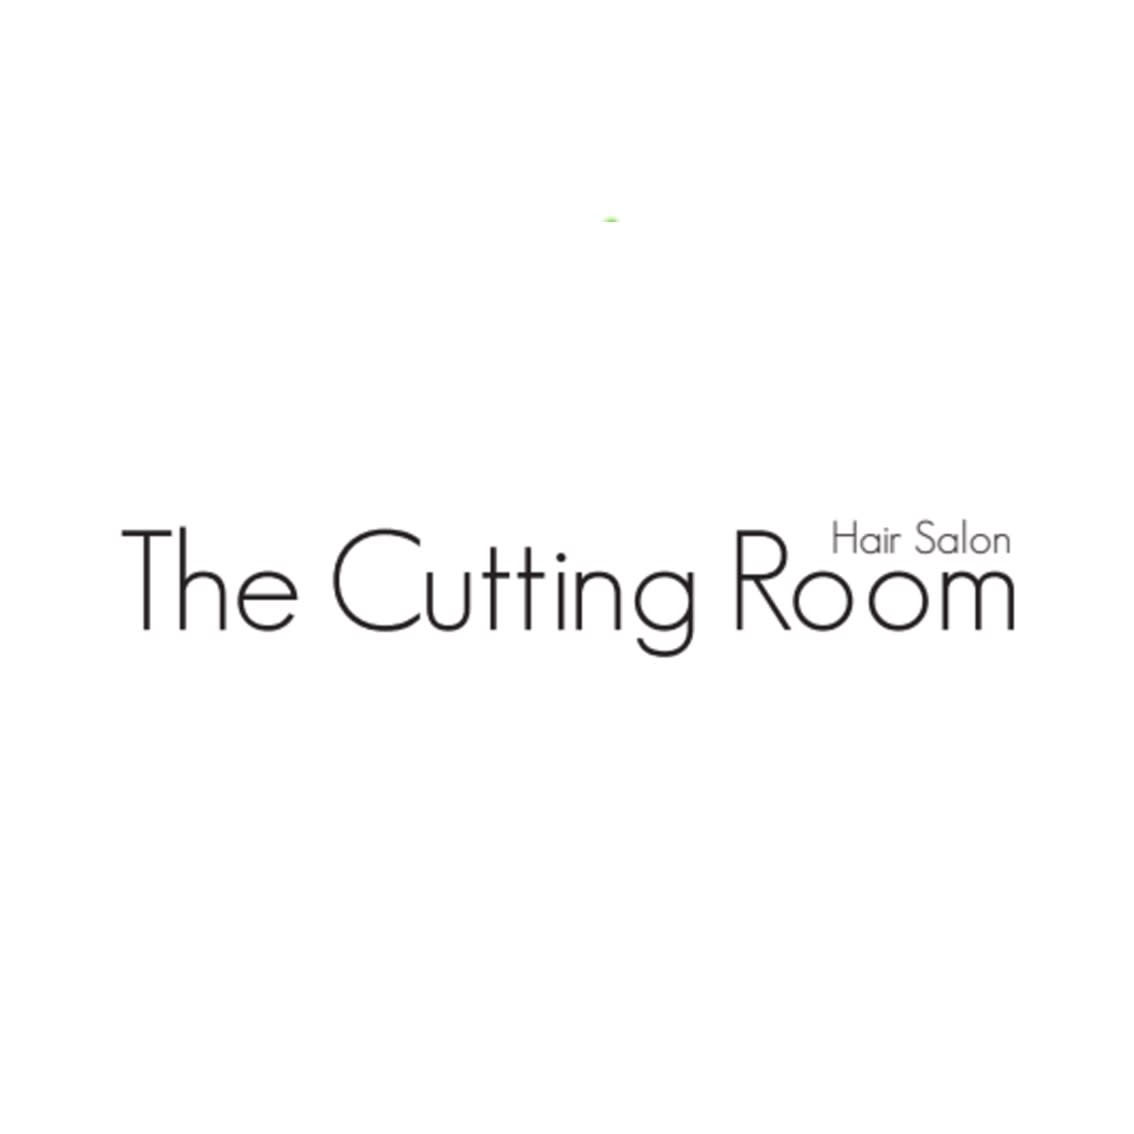 The Cutting Room - Wells, Somerset BA5 1HL - 01749 870900 | ShowMeLocal.com